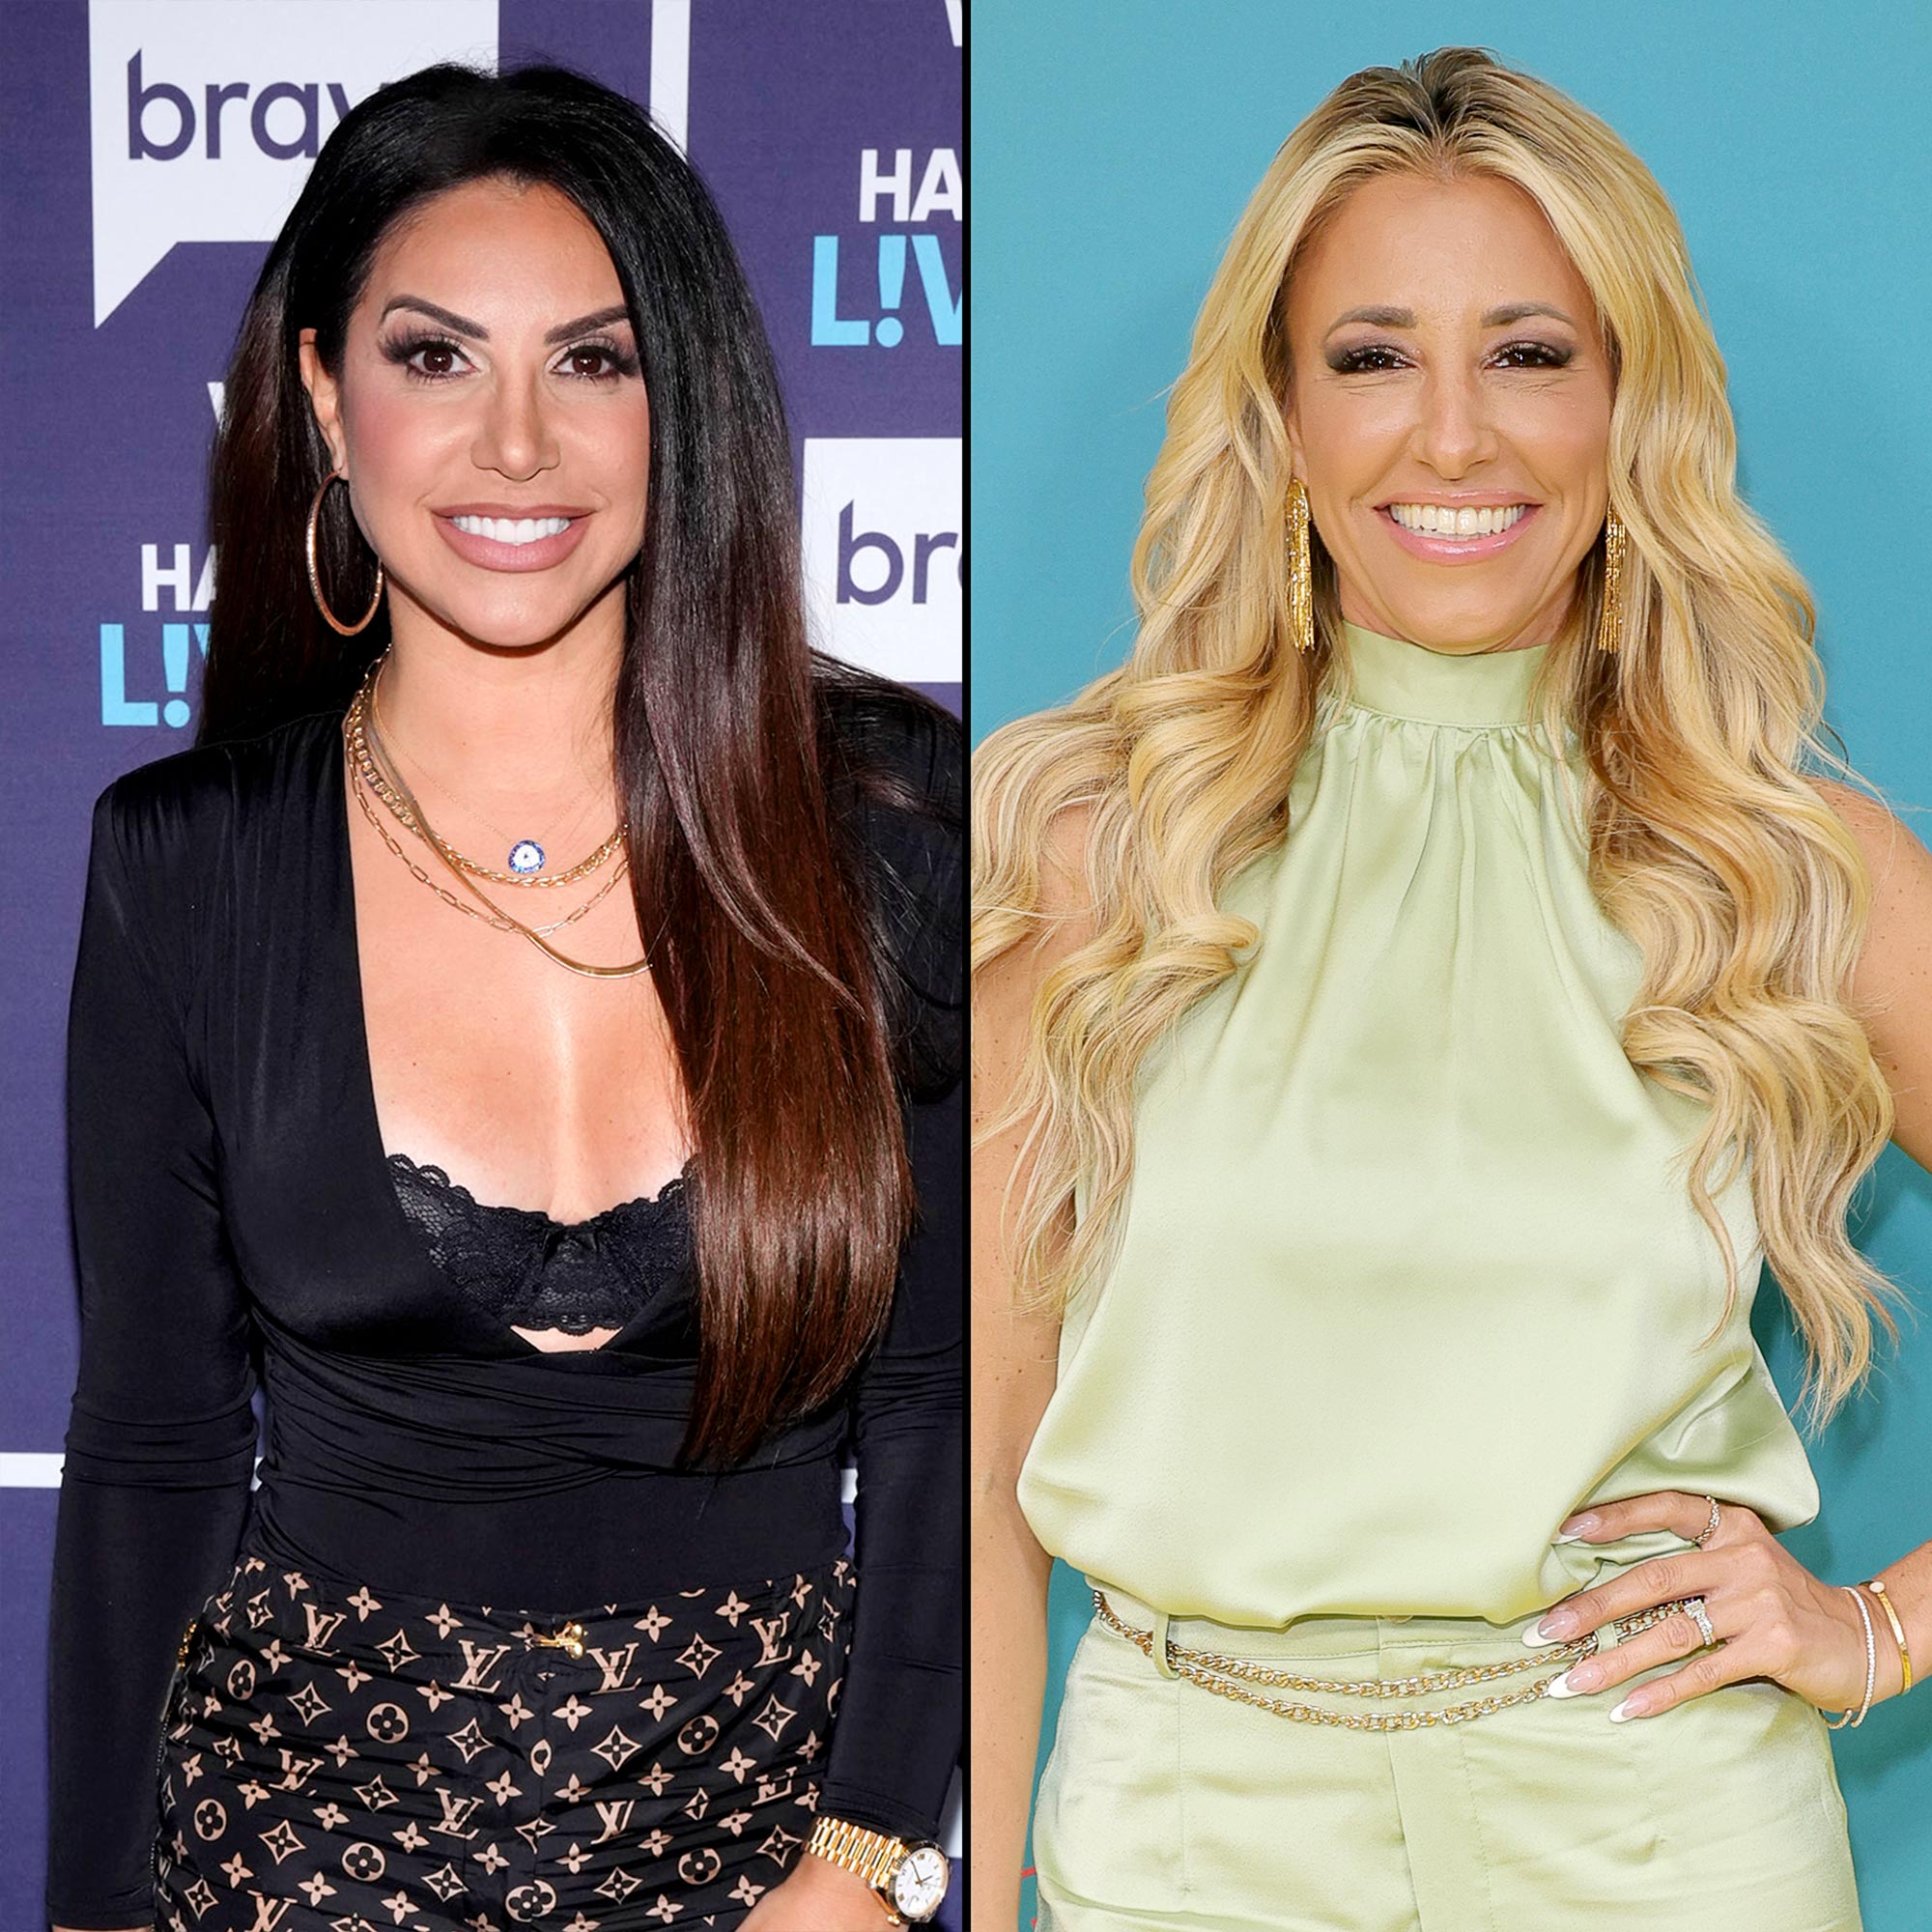 Did Jennifer Aydin and Danielle Cabral Get Suspended From RHONJ? pic